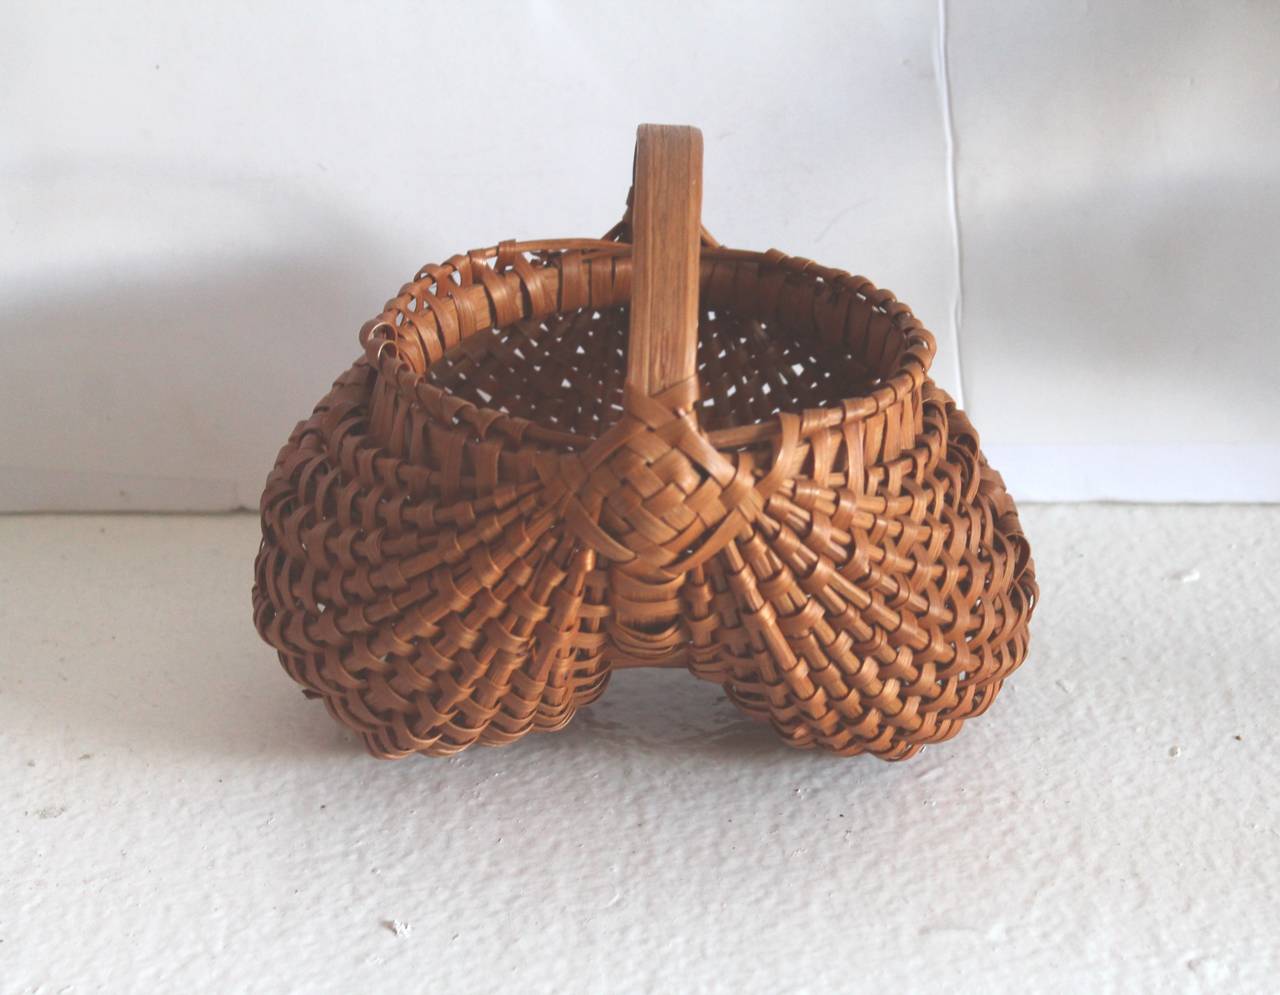 This wonderful buttocks basket has such great form and condition. The dry surface is nice and untouched. This baskets fits in the palm of your hands. This is a handmade basket.